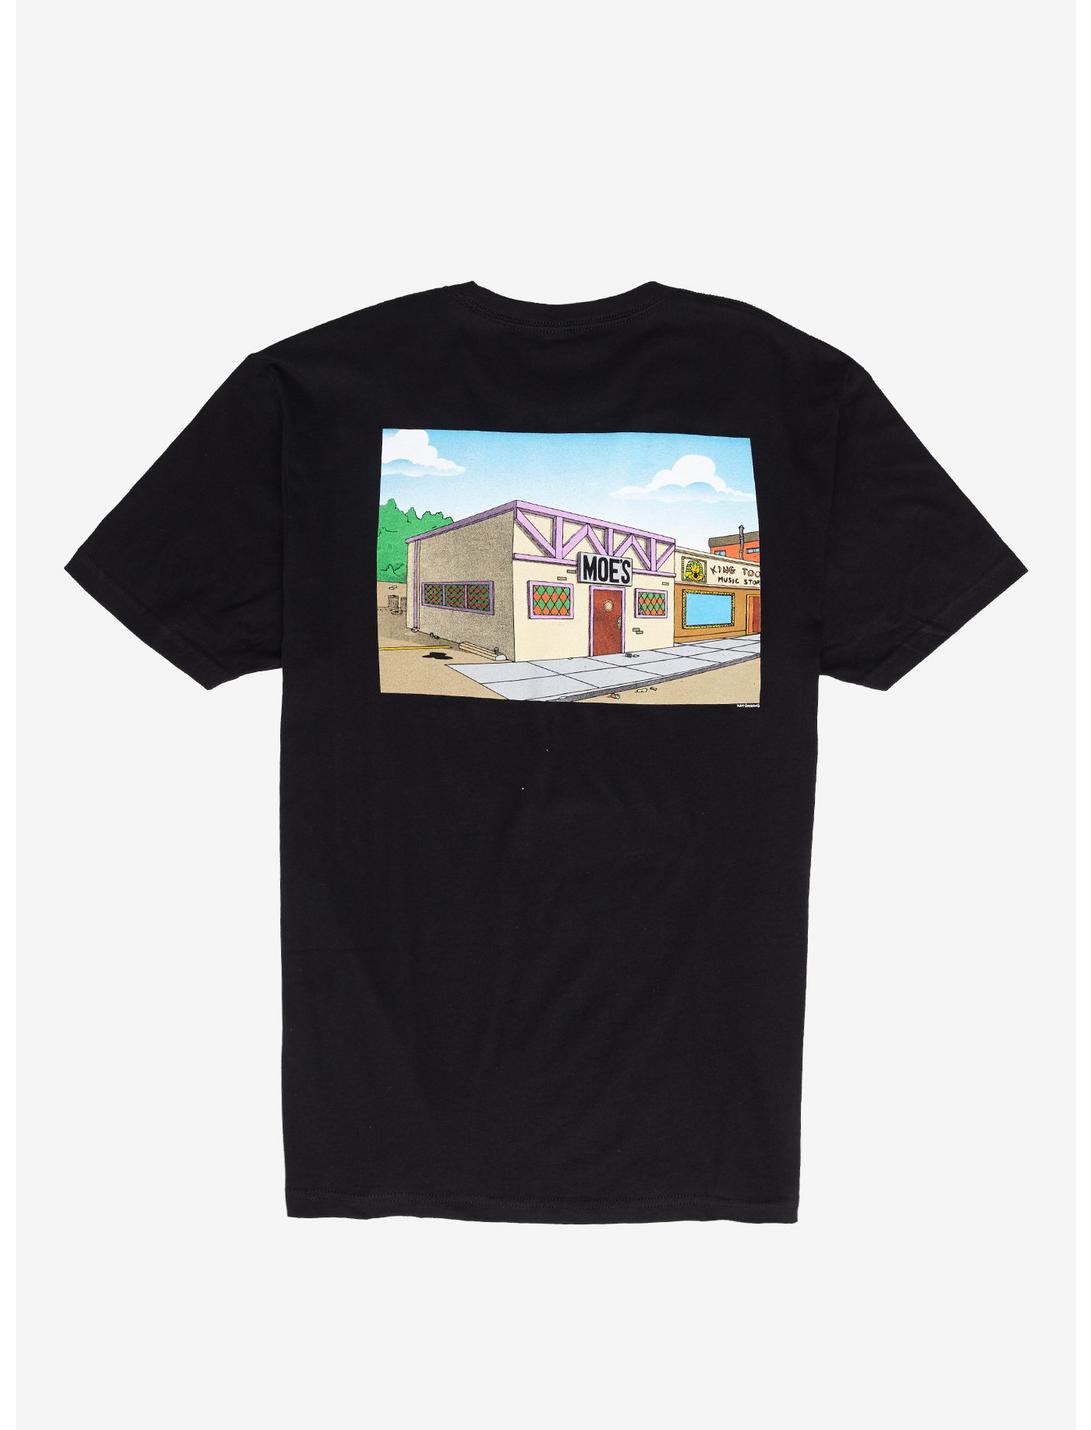 The Simpsons Moe's Tavern T-Shirt - BoxLunch Exclusive, BLACK, hi-res